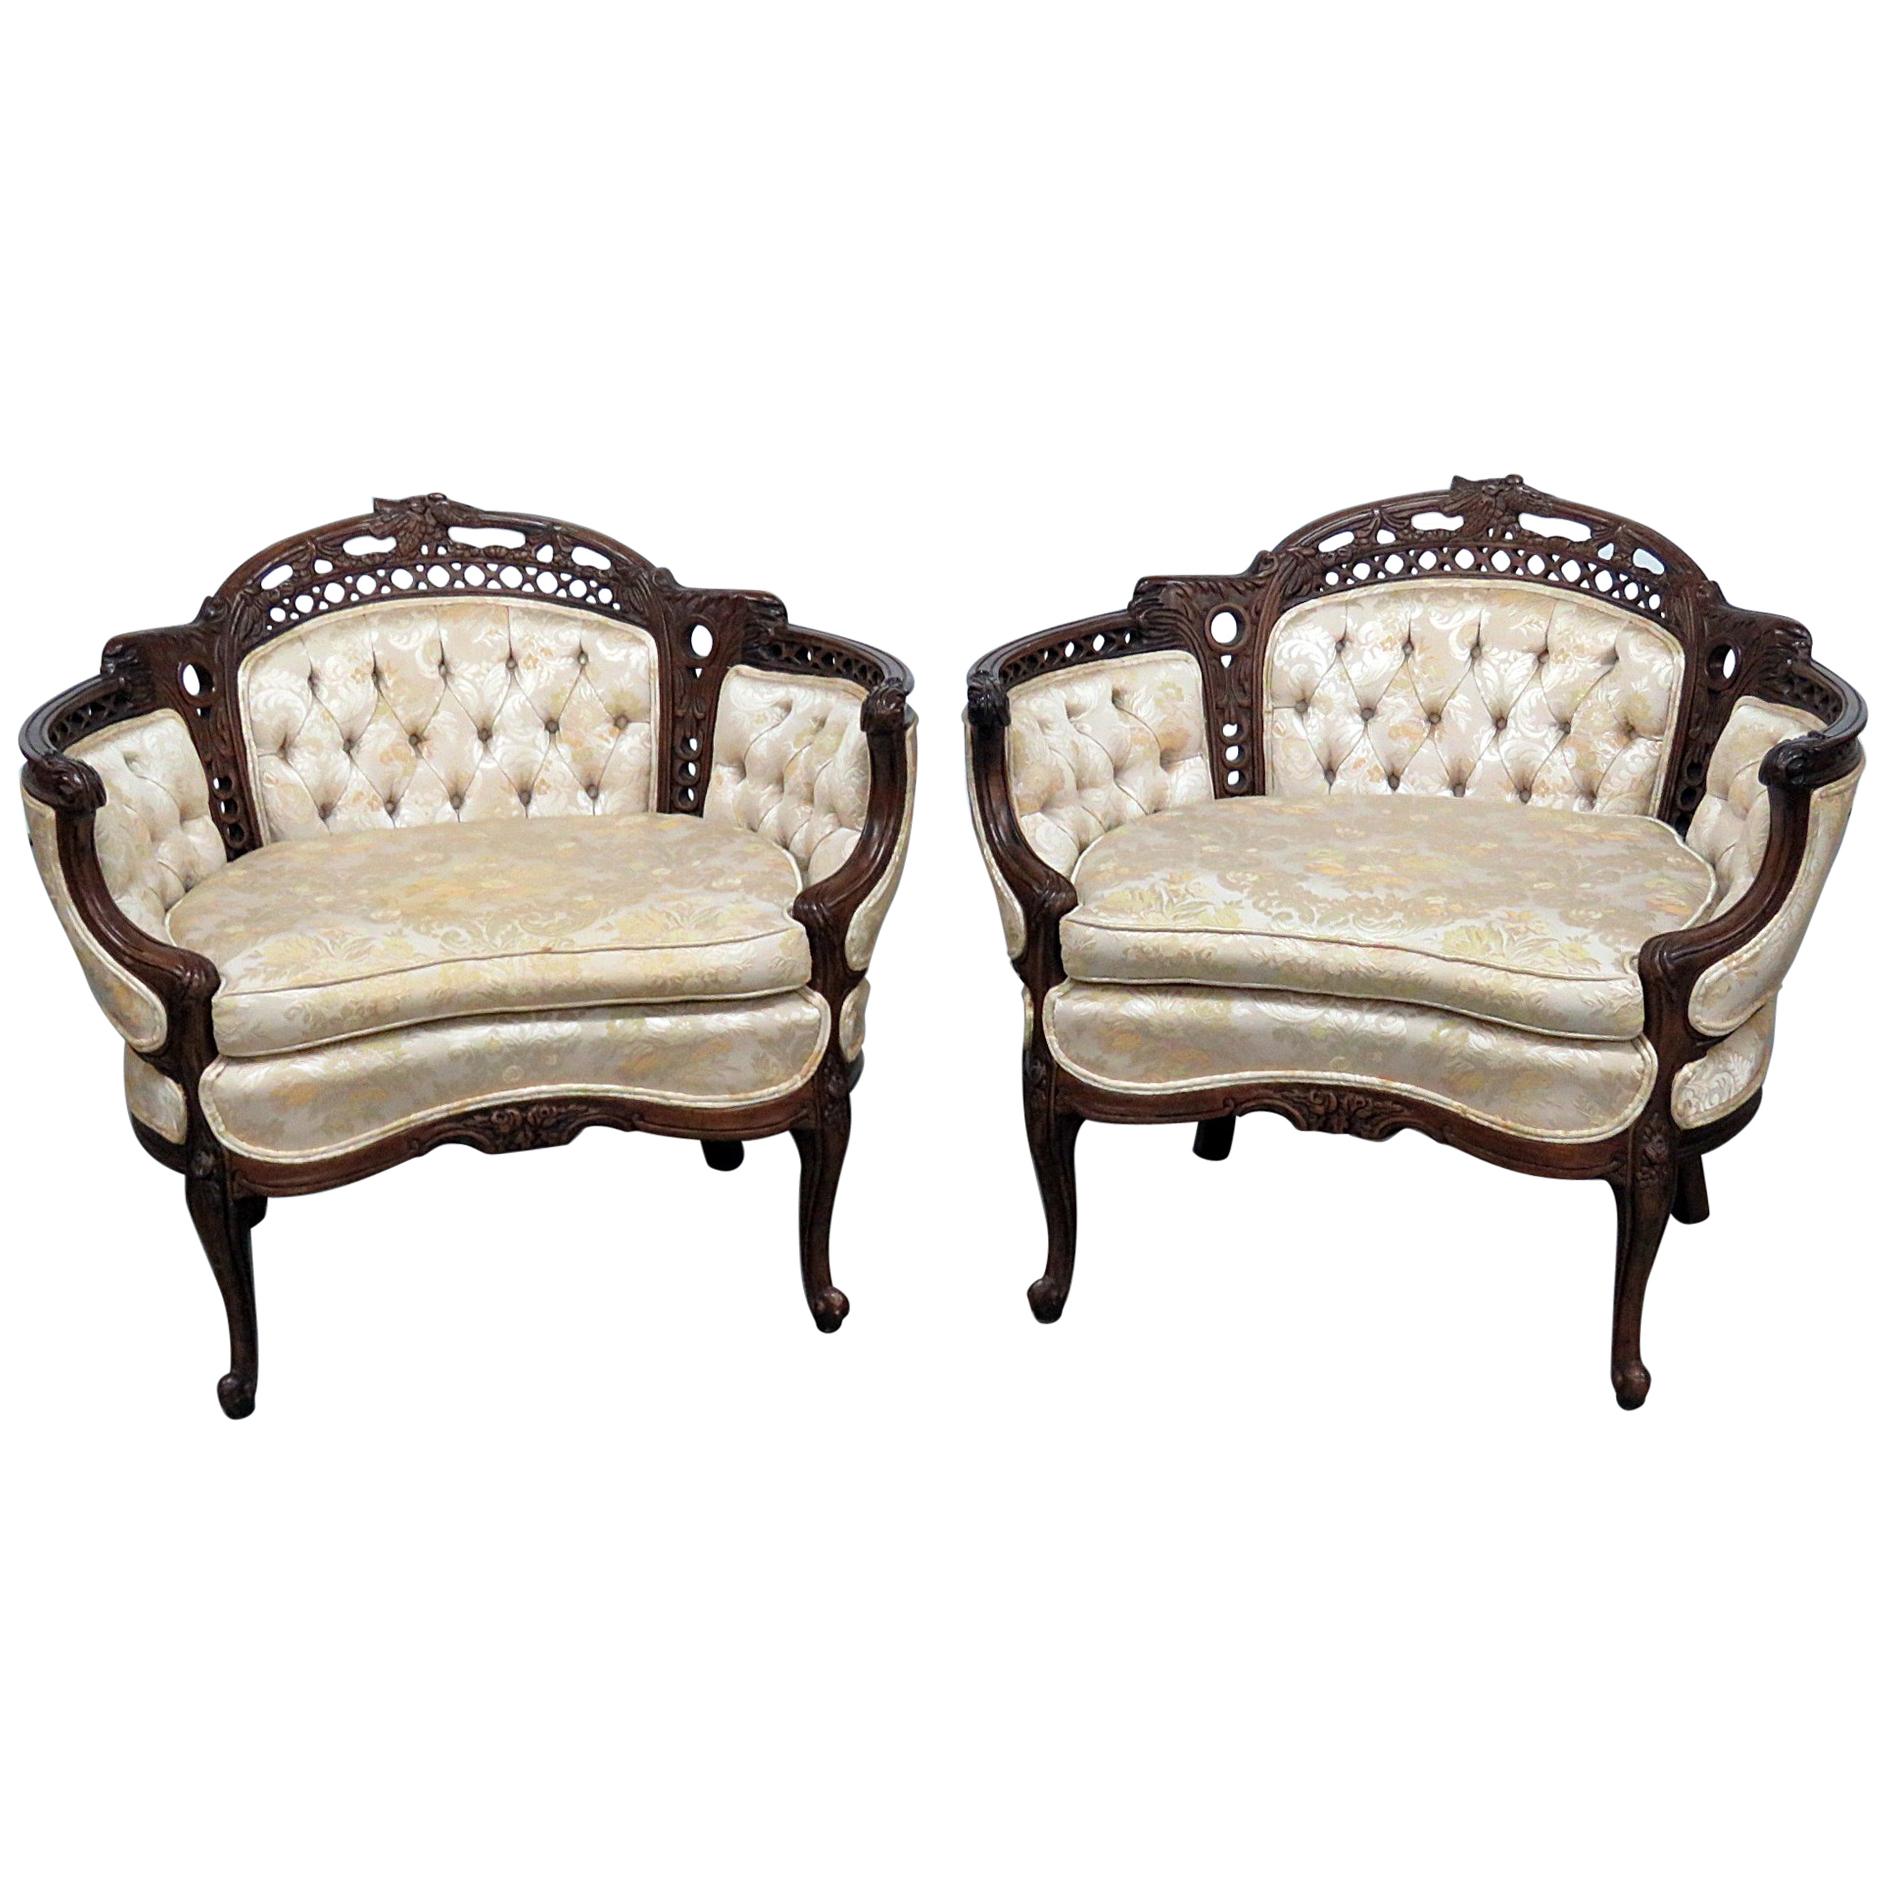 Pair of French Carved Mahogany Tufted Louis XV Style Marquis Bergere Chairs